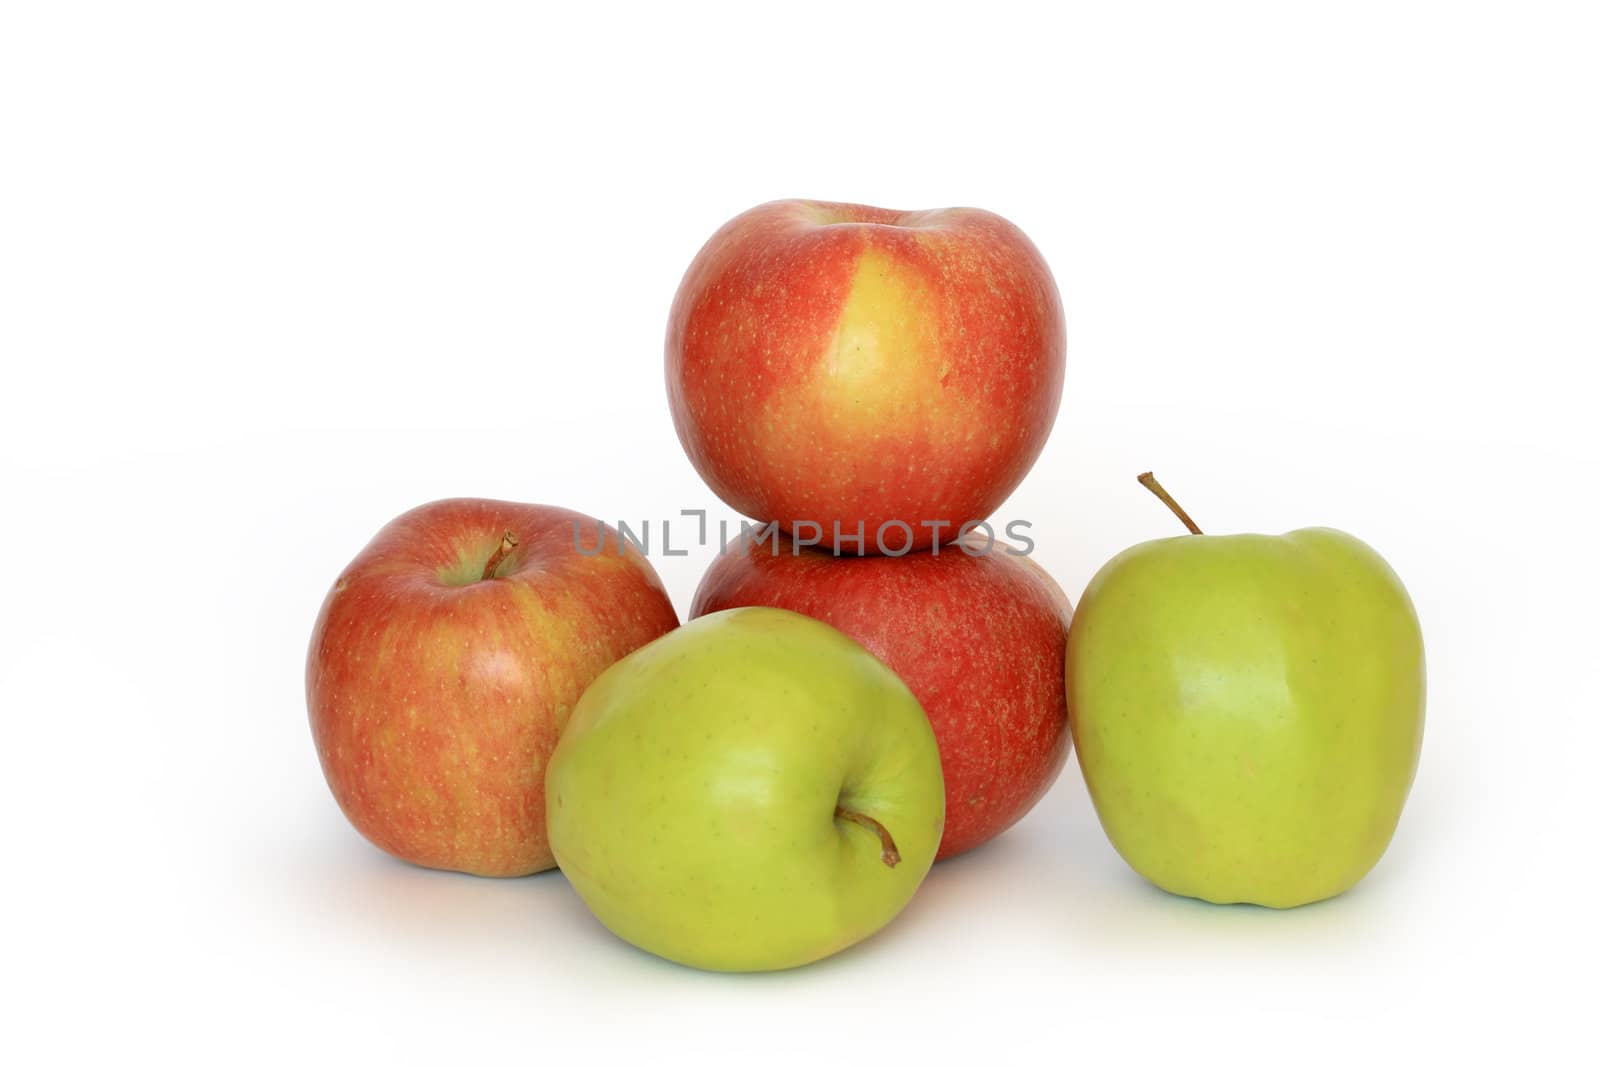 Few red and green apples isolated on white background with clipping path